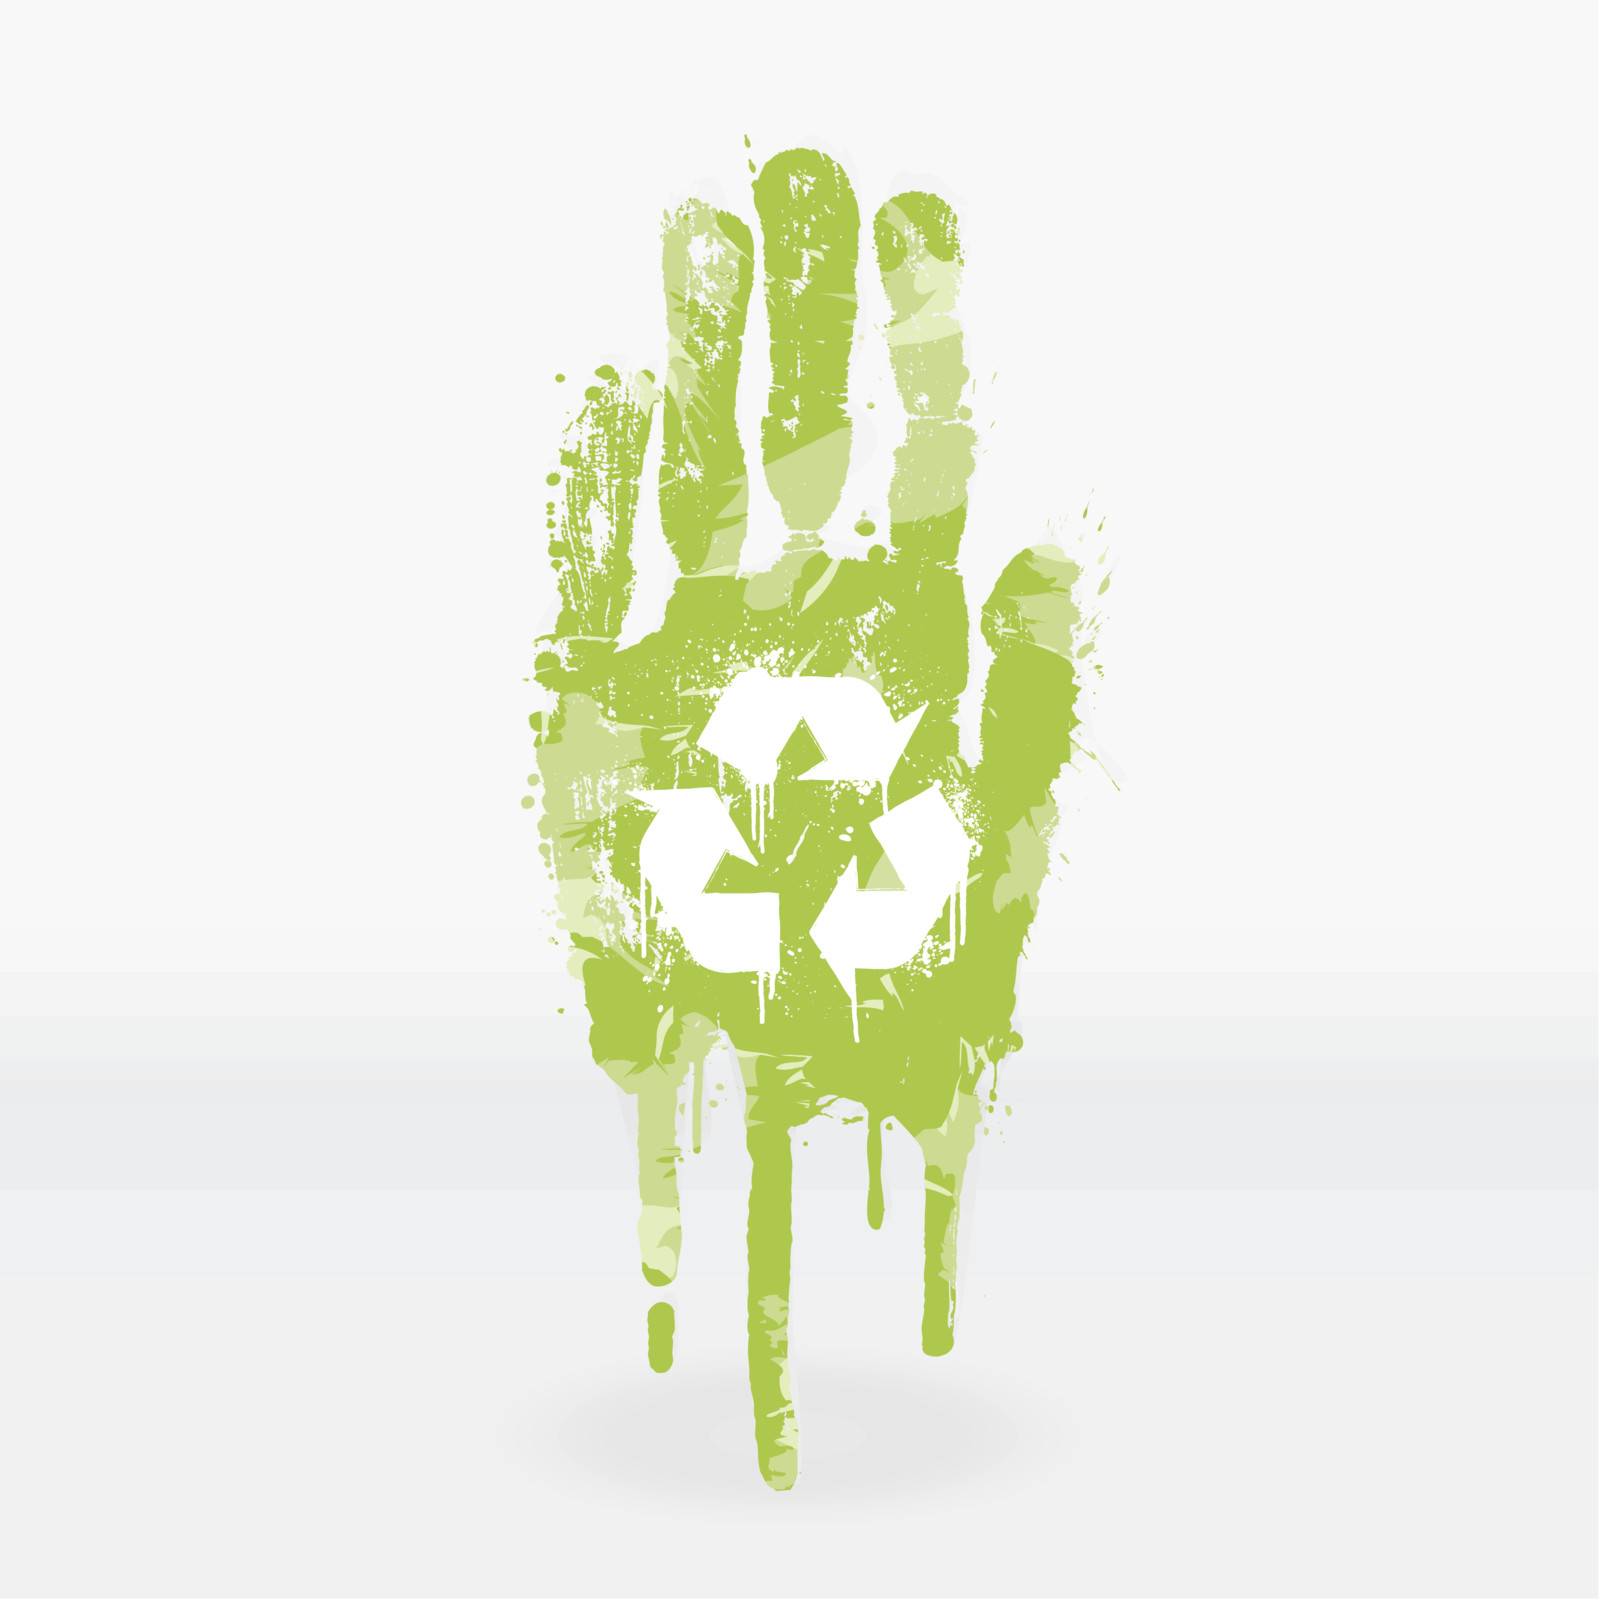 Ecological hand design by domencolja